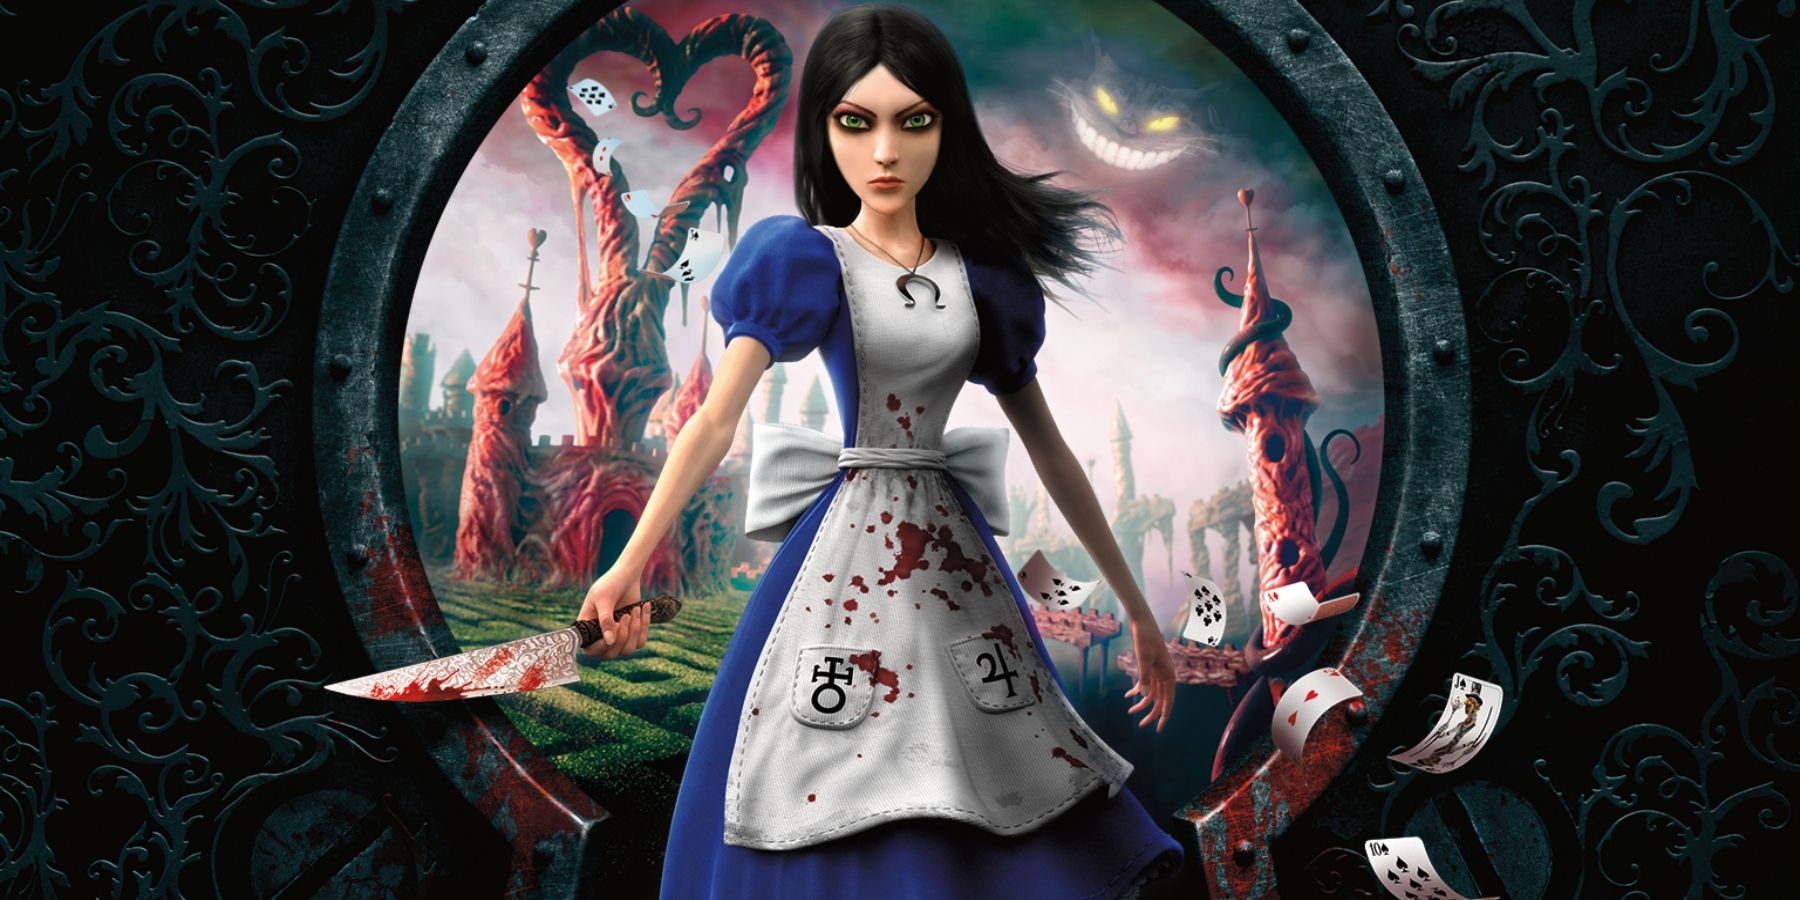 A screenshot of Alice wielding a knife in Alice: Madness Returns